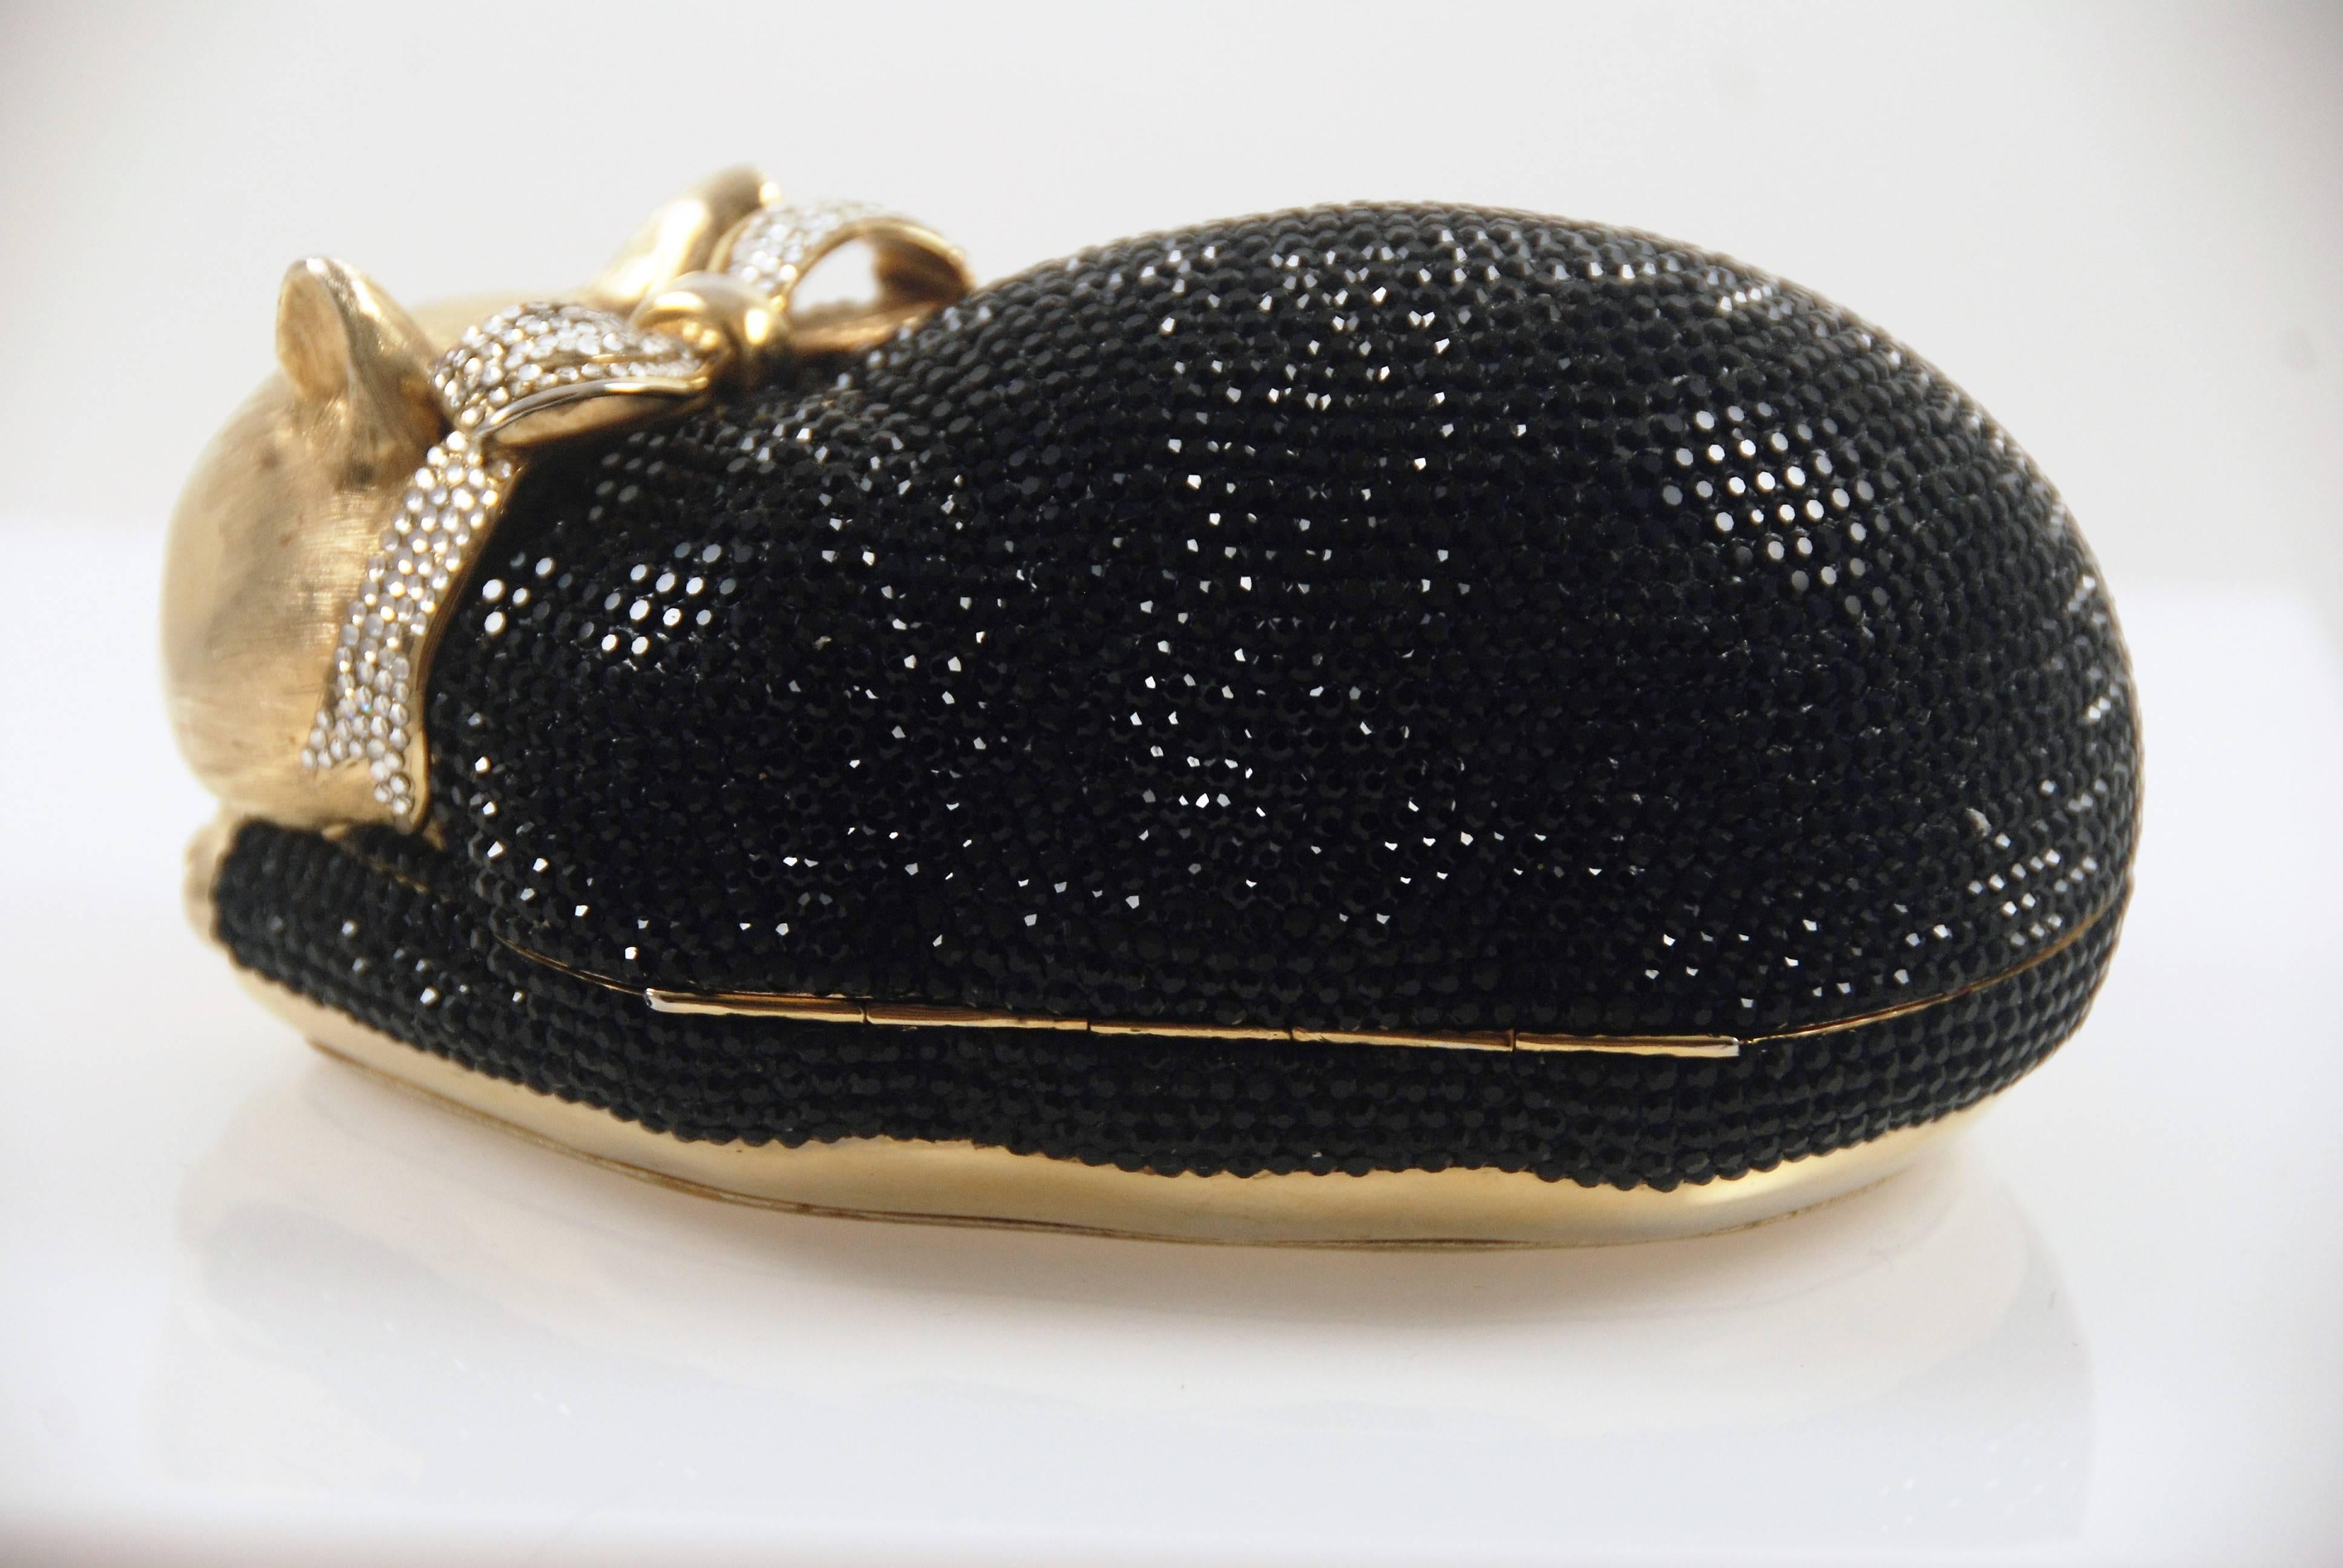 Charming sleeping kitty minaudiere by Judith Leiber. Done in black rhinestones with a clear rhinestone bow. Bag closes with loud click and closes securely. One of Leiber's most popular and enduring designs.